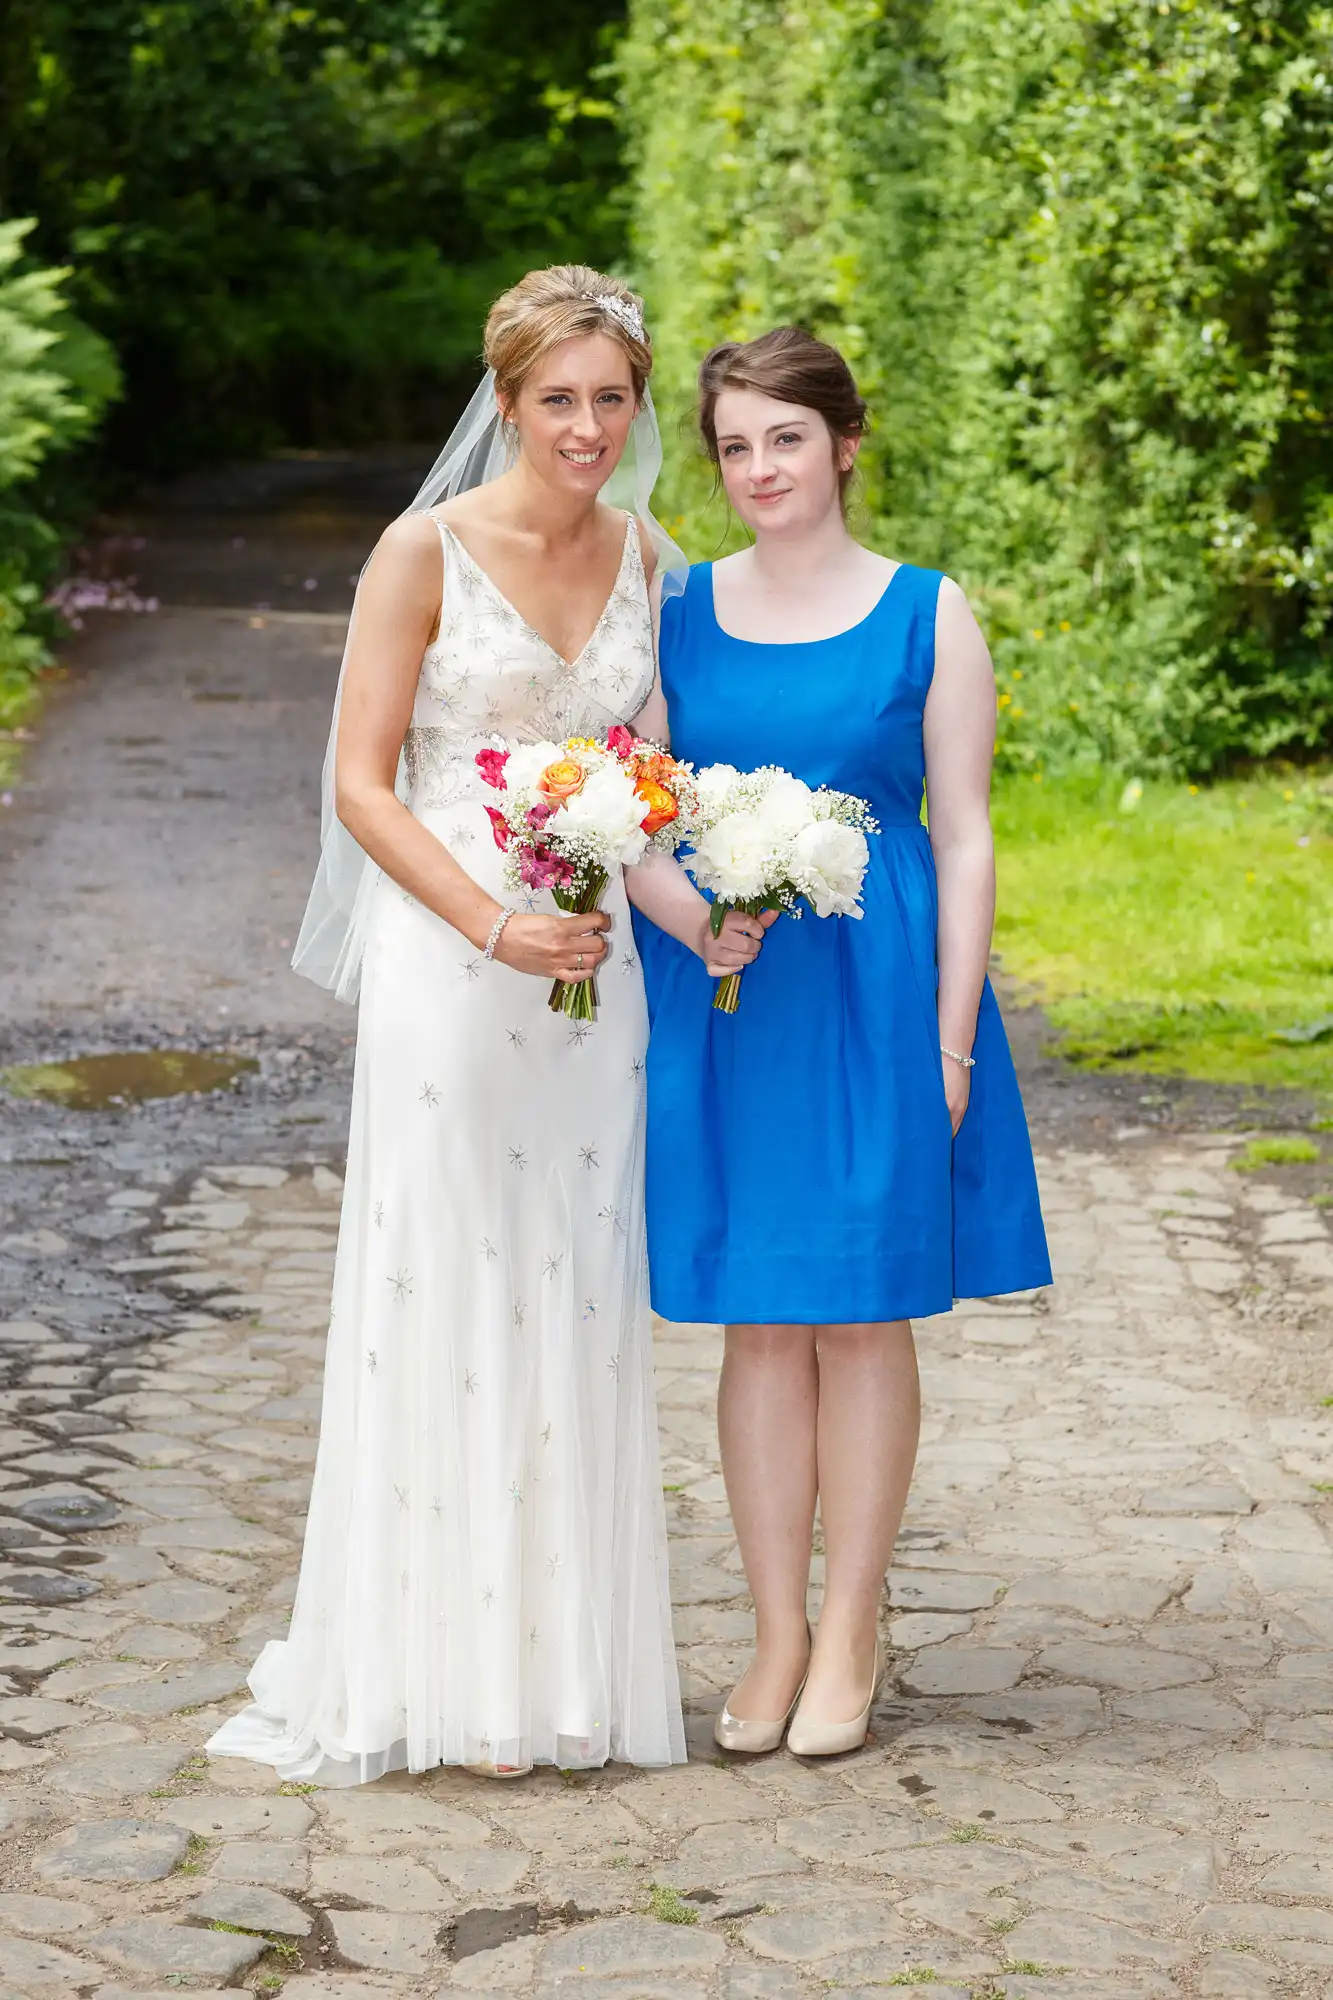 A bride in a white gown holding a bouquet stands next to a bridesmaid in a blue dress, also holding flowers, on a garden path.